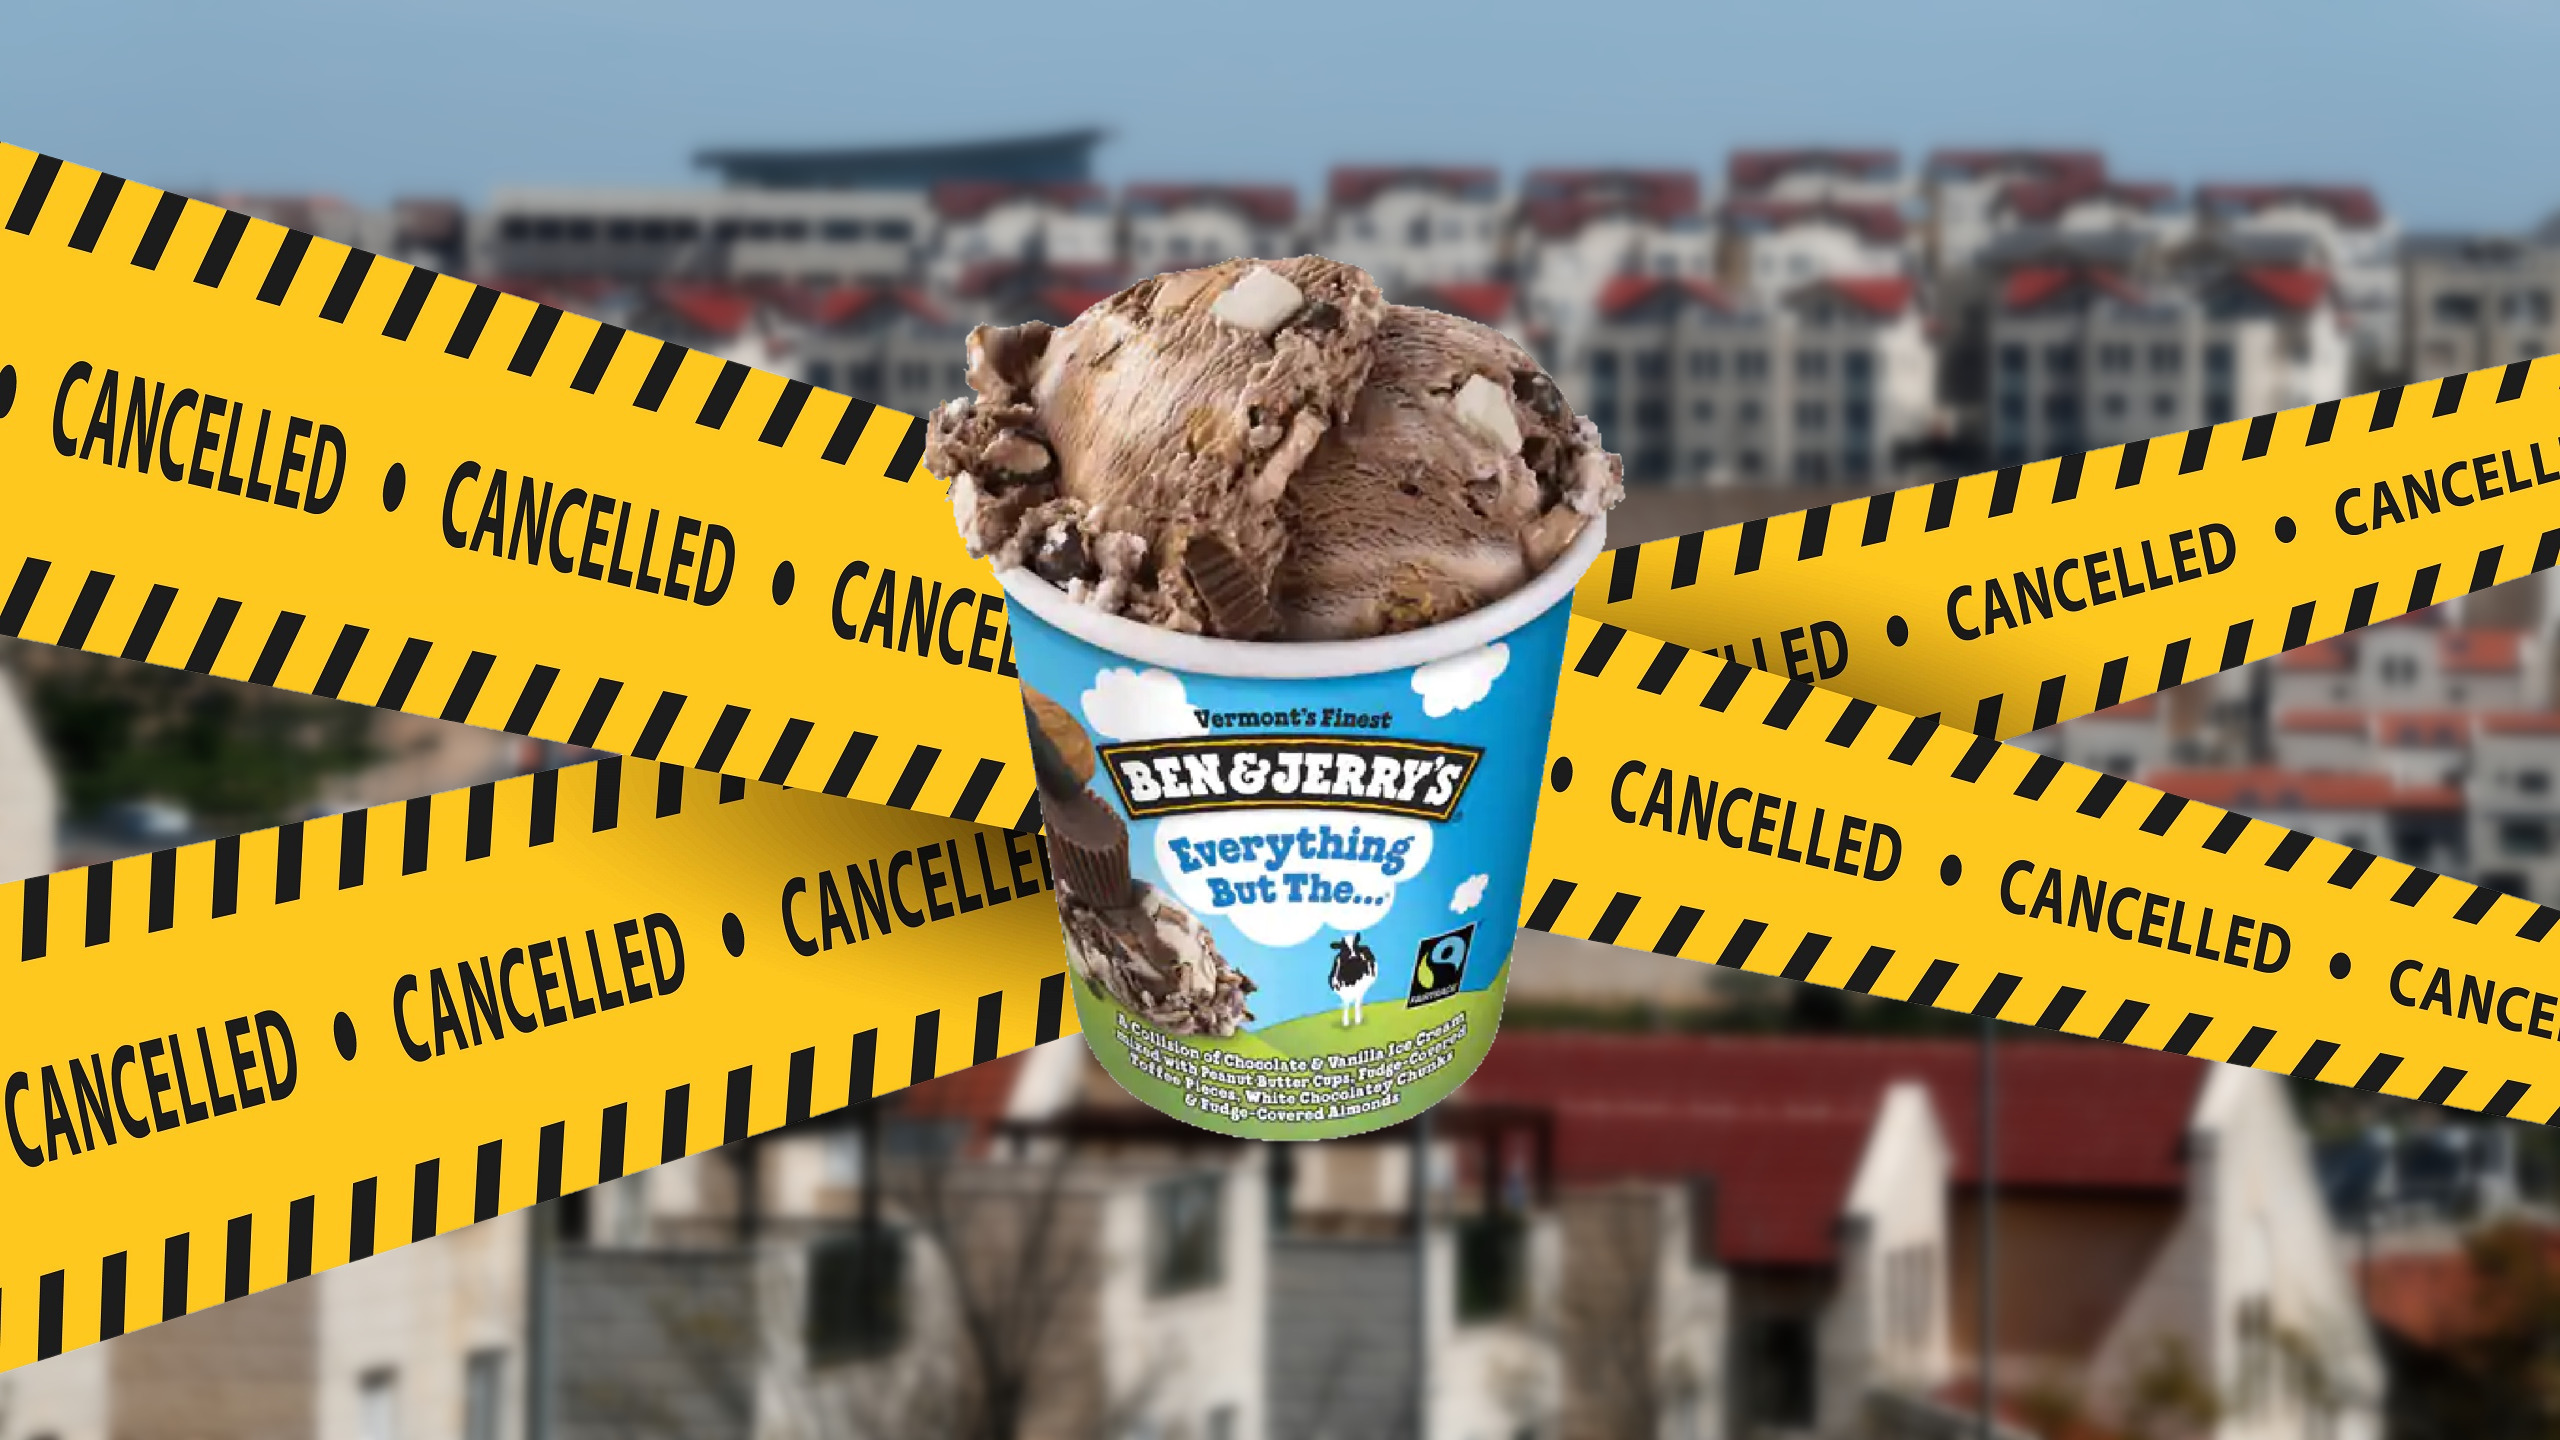 Why Did the Ben & Jerry’s Boycott Hurt Us More Than Rocket Fire on the North?